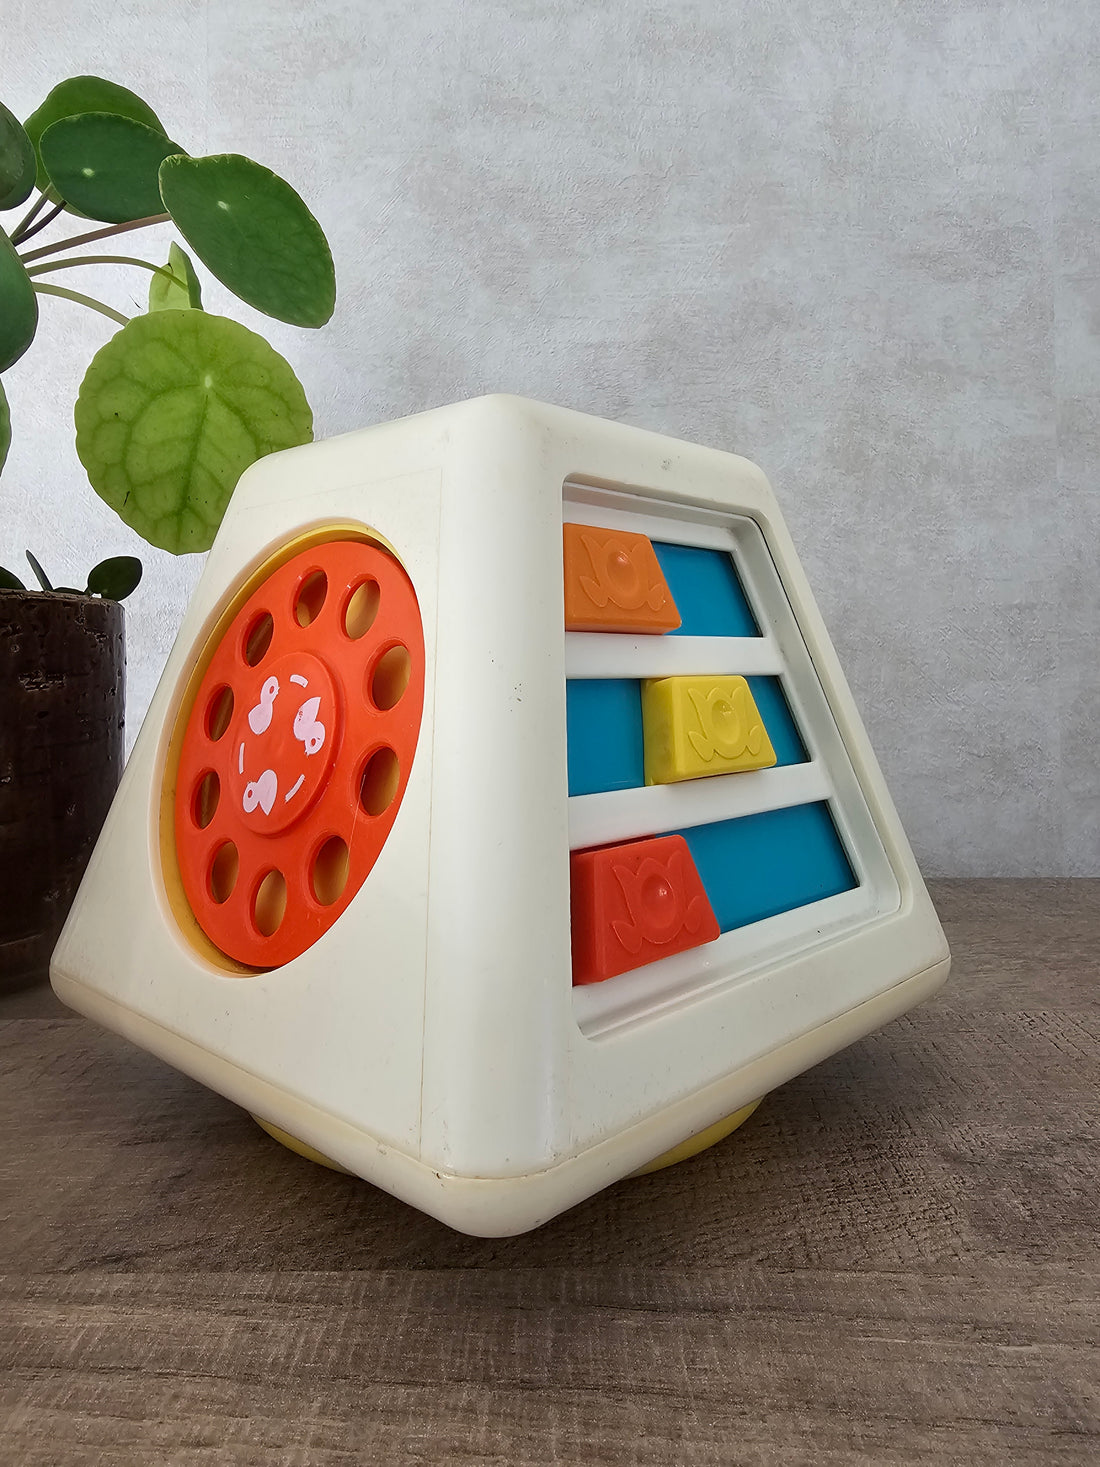 Fisher Price – Turn and Learn Baby Activity Center Spinning Toy.